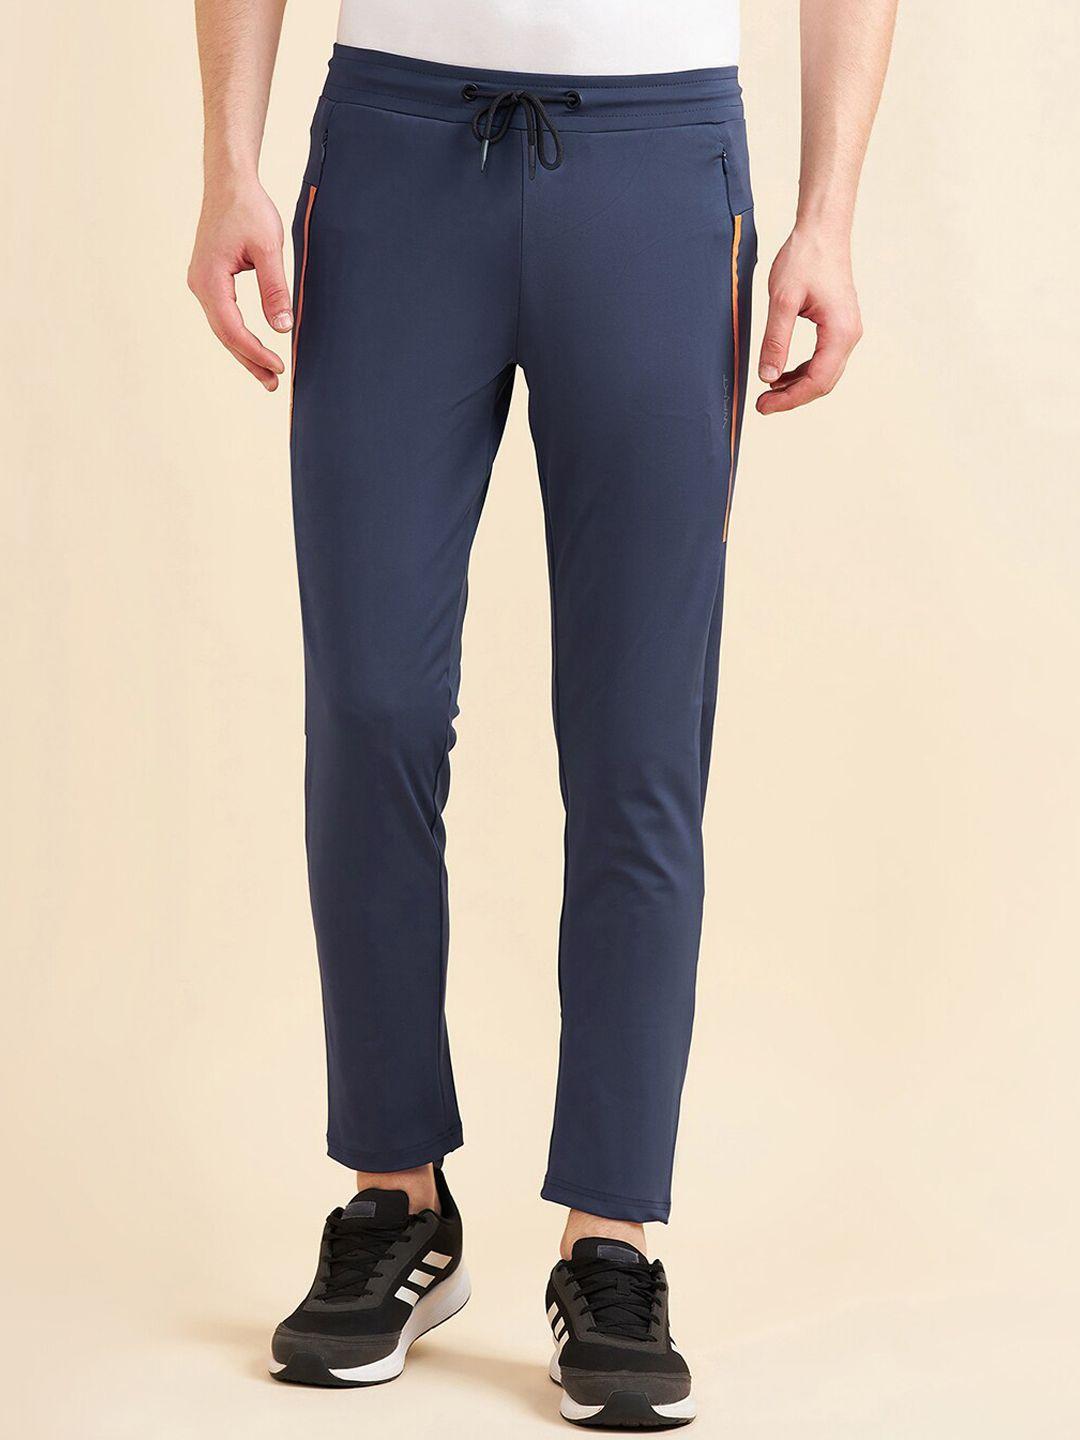 sweet-dreams-men-navy-blue-mid-rise-4-way-stretch-track-pants